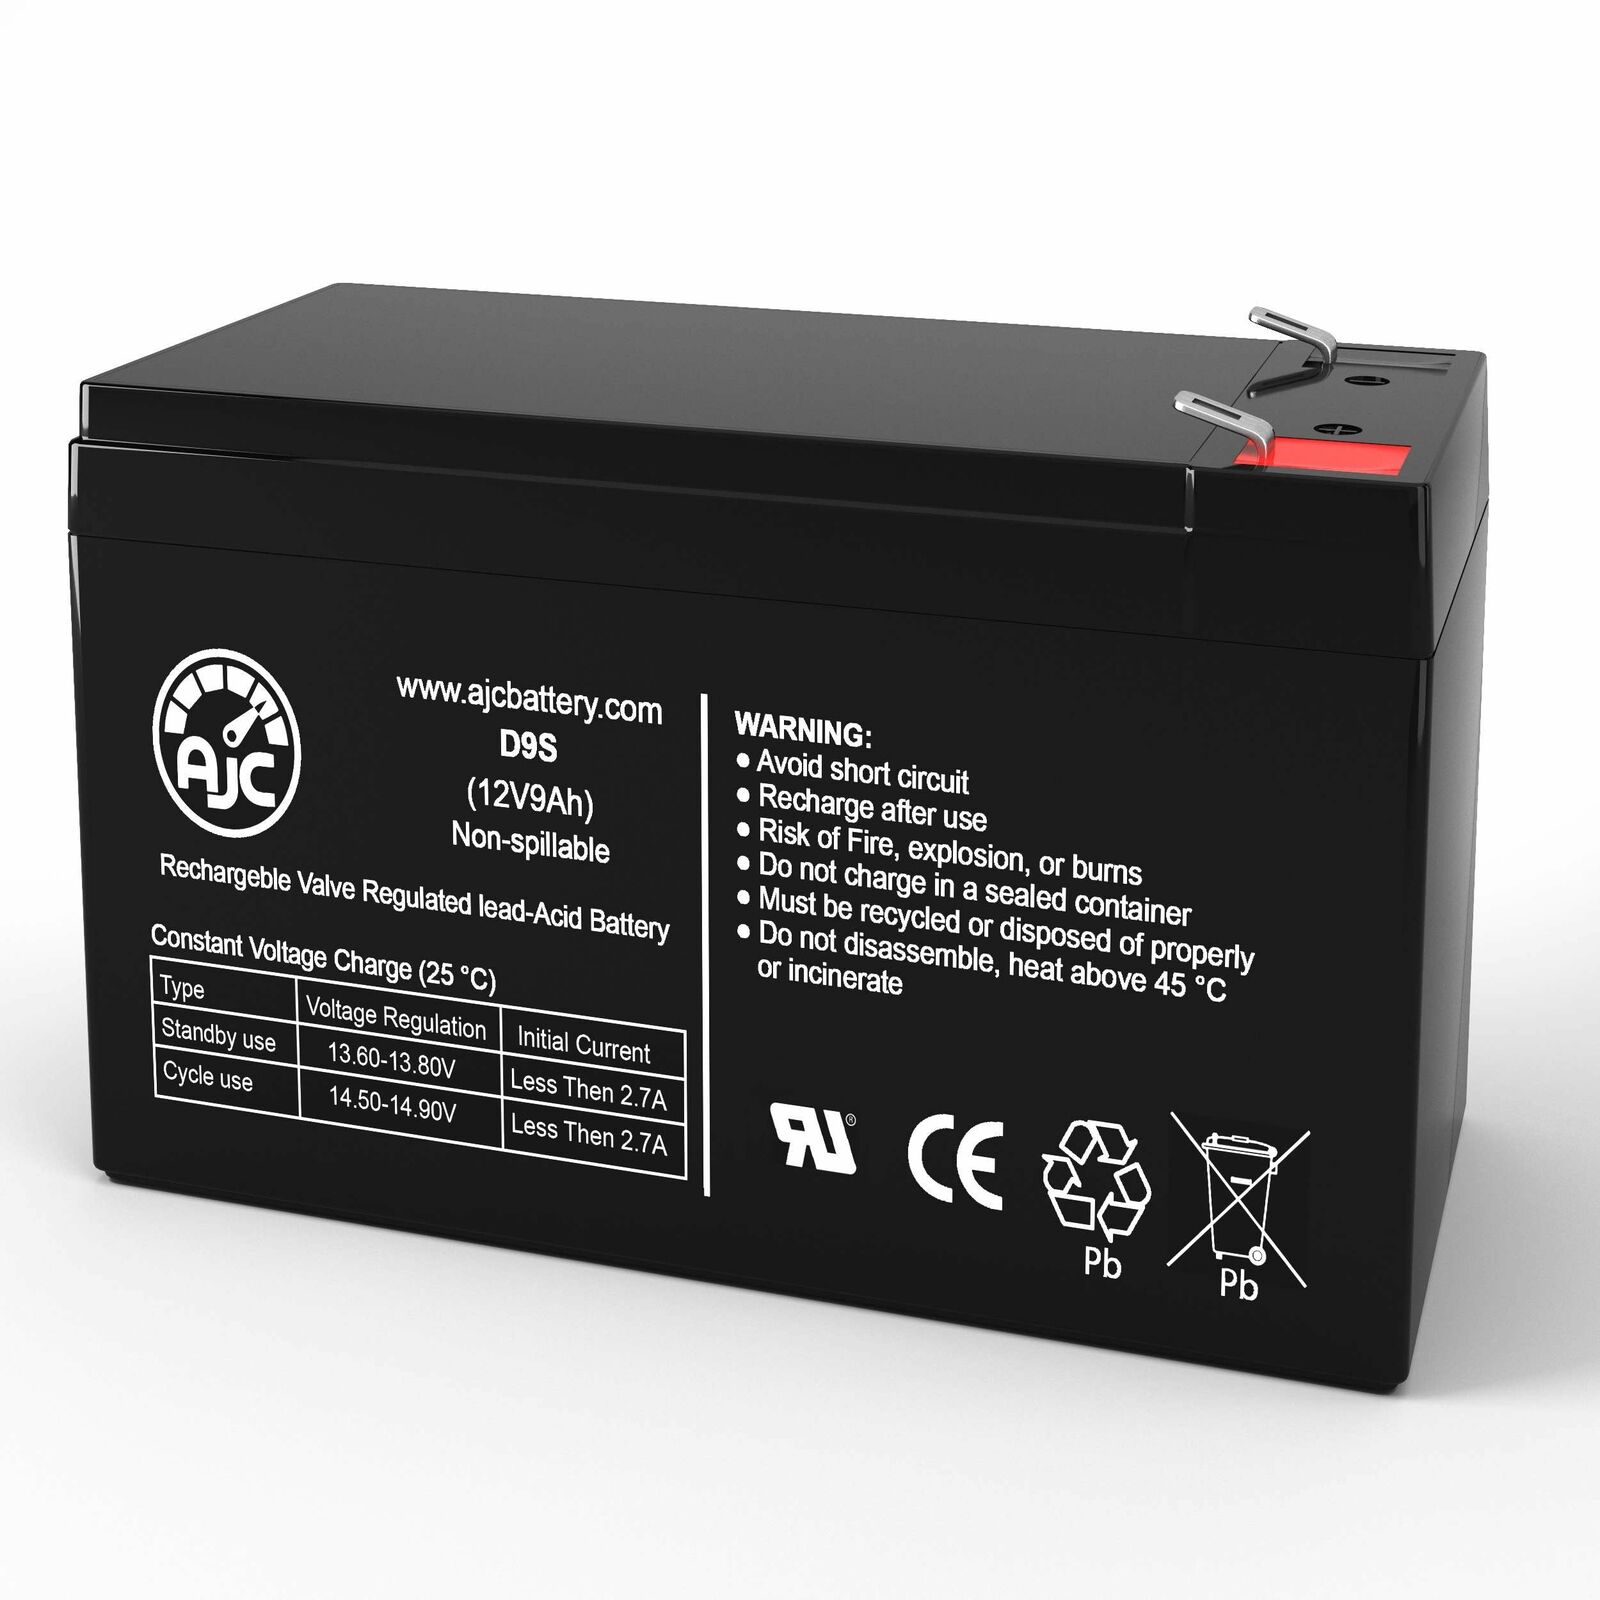 CyberPower PFC Sinewave CP1000PFCLCD 12V 9Ah UPS Replacement Battery